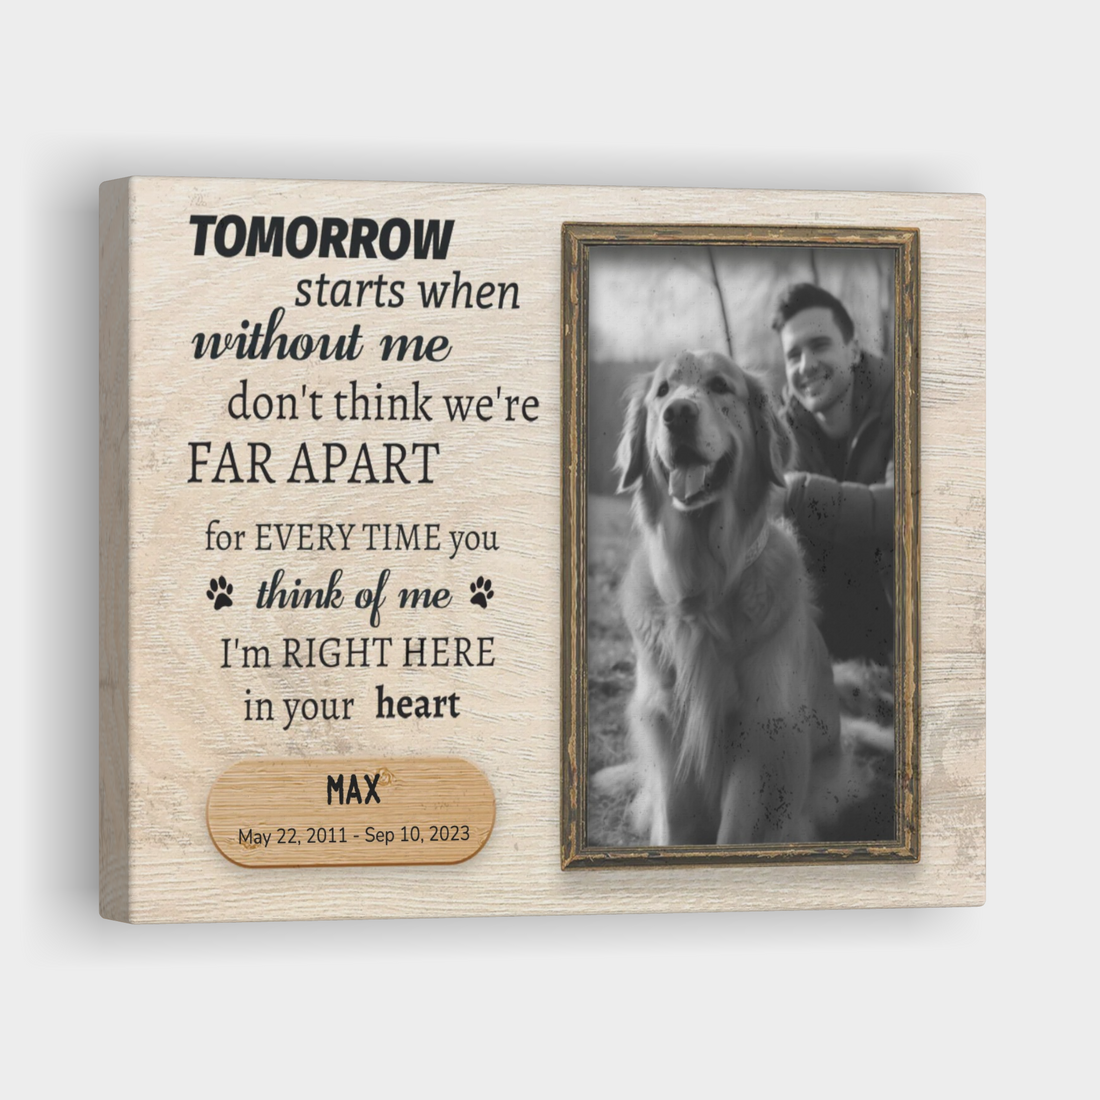 Tomorrow Start Without Me, Hang and Place - Personalized Canvas Print Pet Memorial